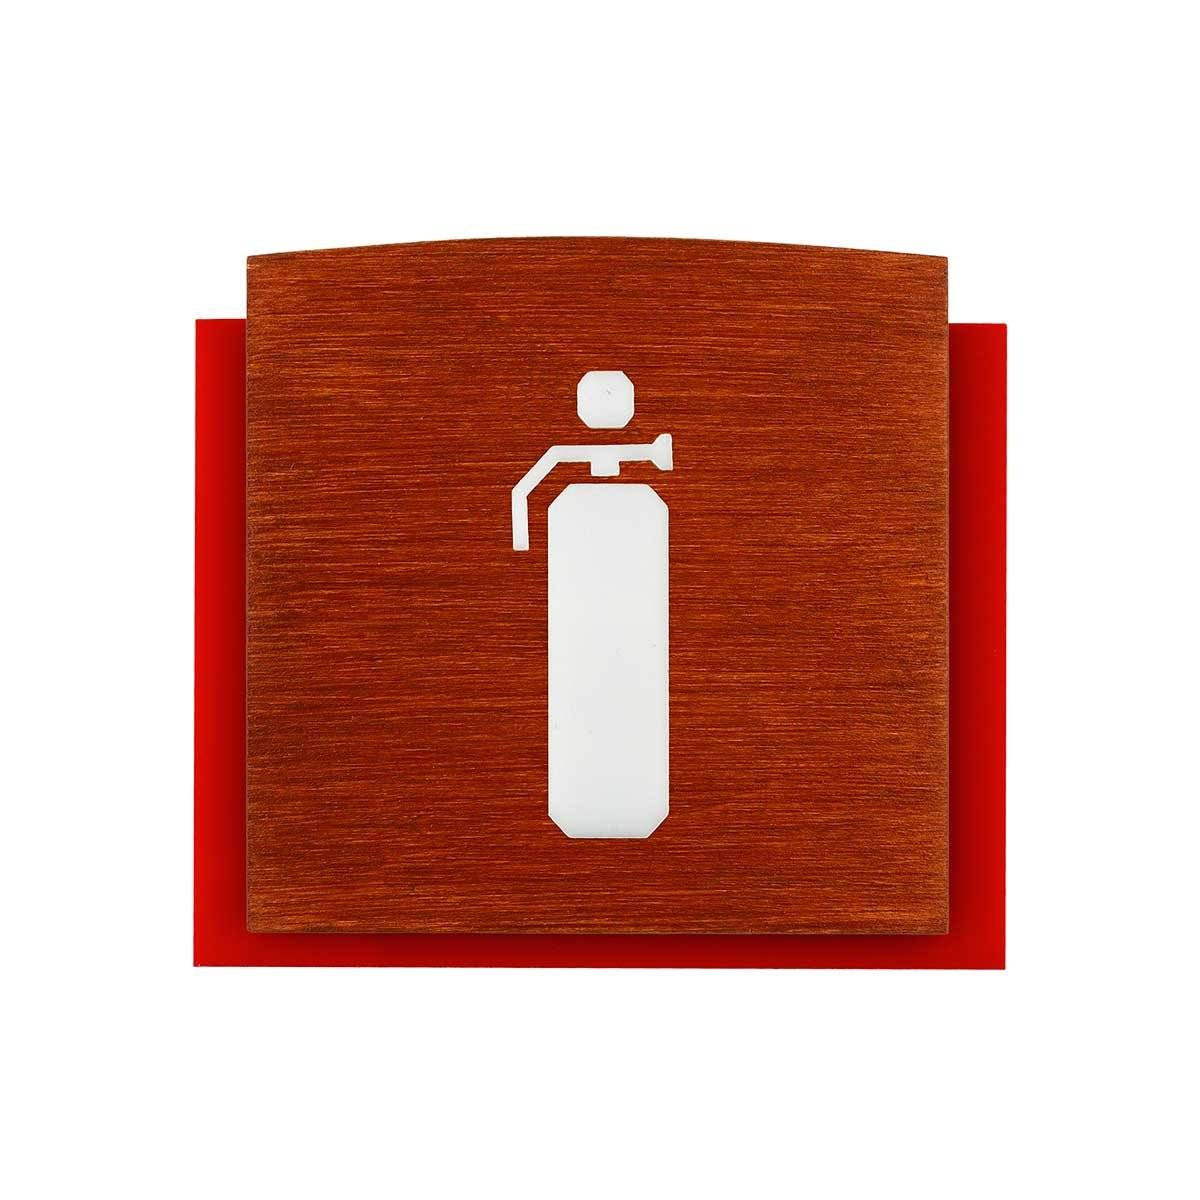 Wood Extinguisher Fire Safety Sign for Office Information signs Redwood Bsign